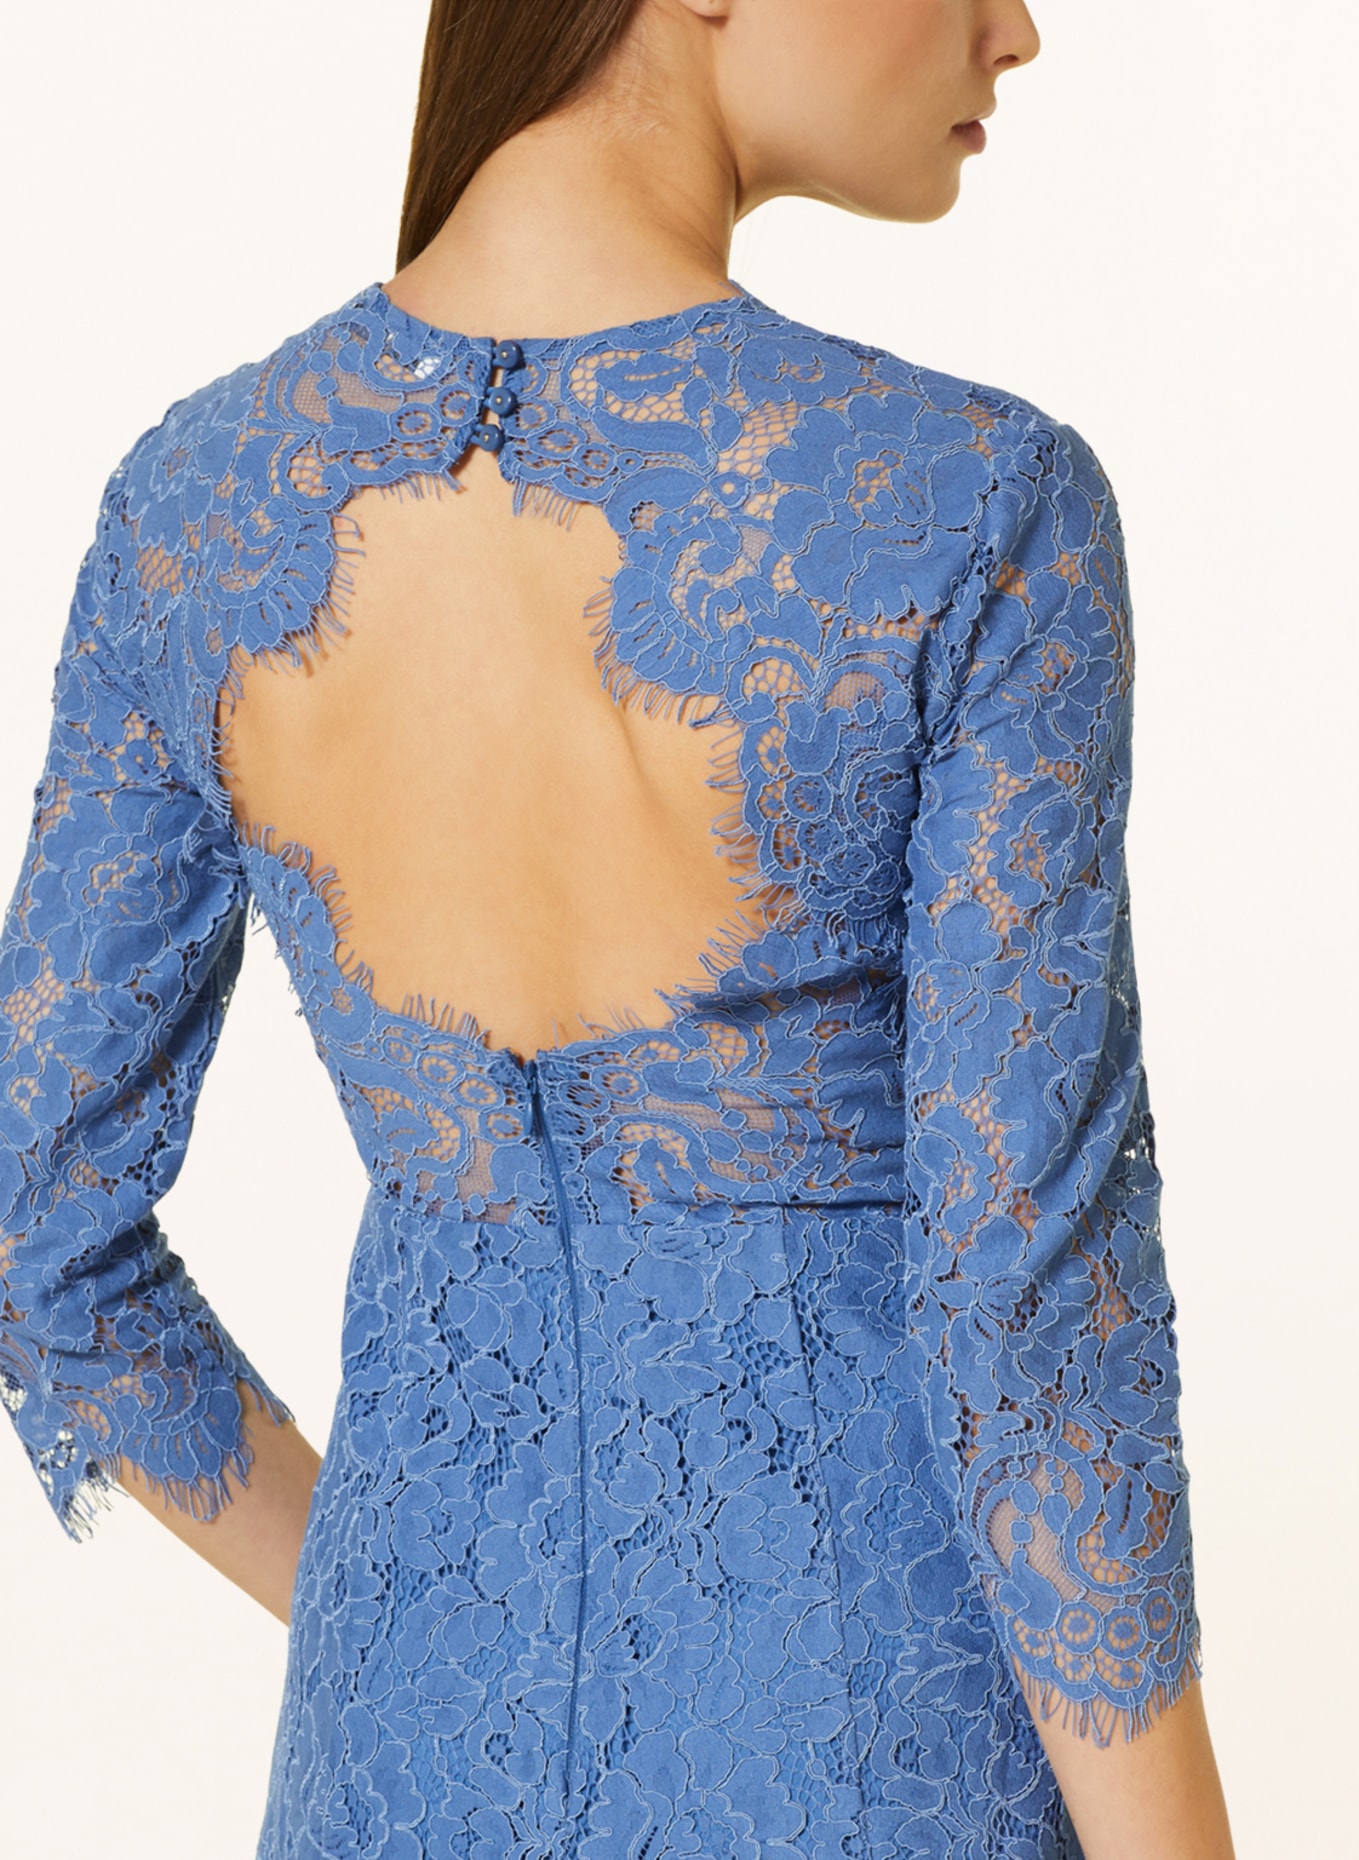 IVY OAK Cocktail dress MADELEINE in lace with cut-out, Color: BLUE (Image 4)